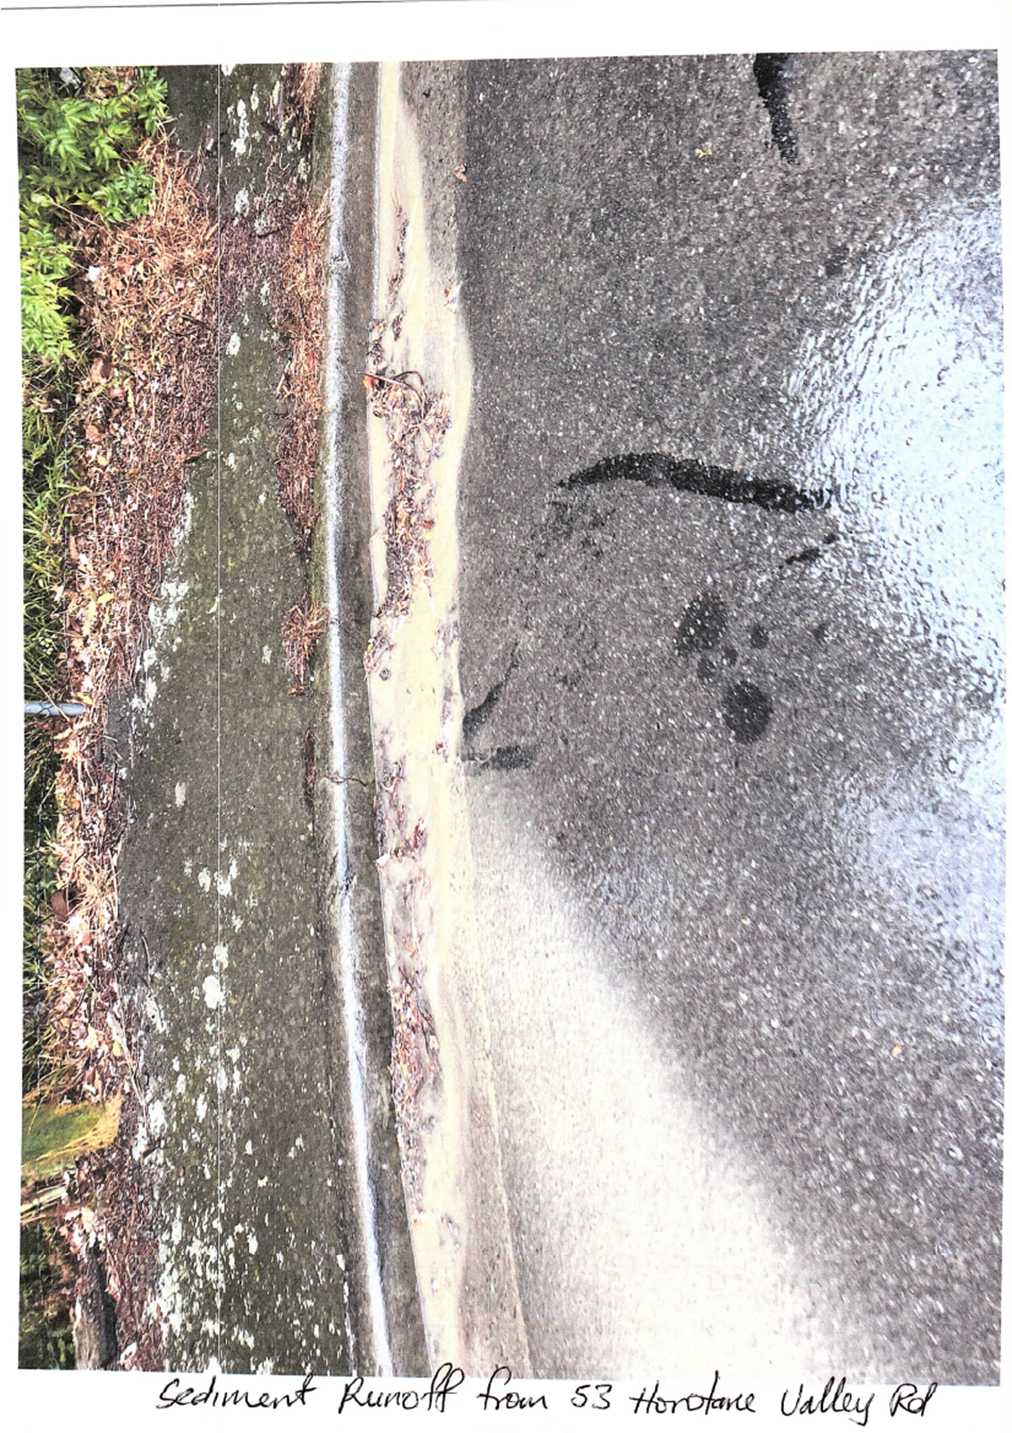 A wet road with a puddle of water

Description automatically generated with medium confidence